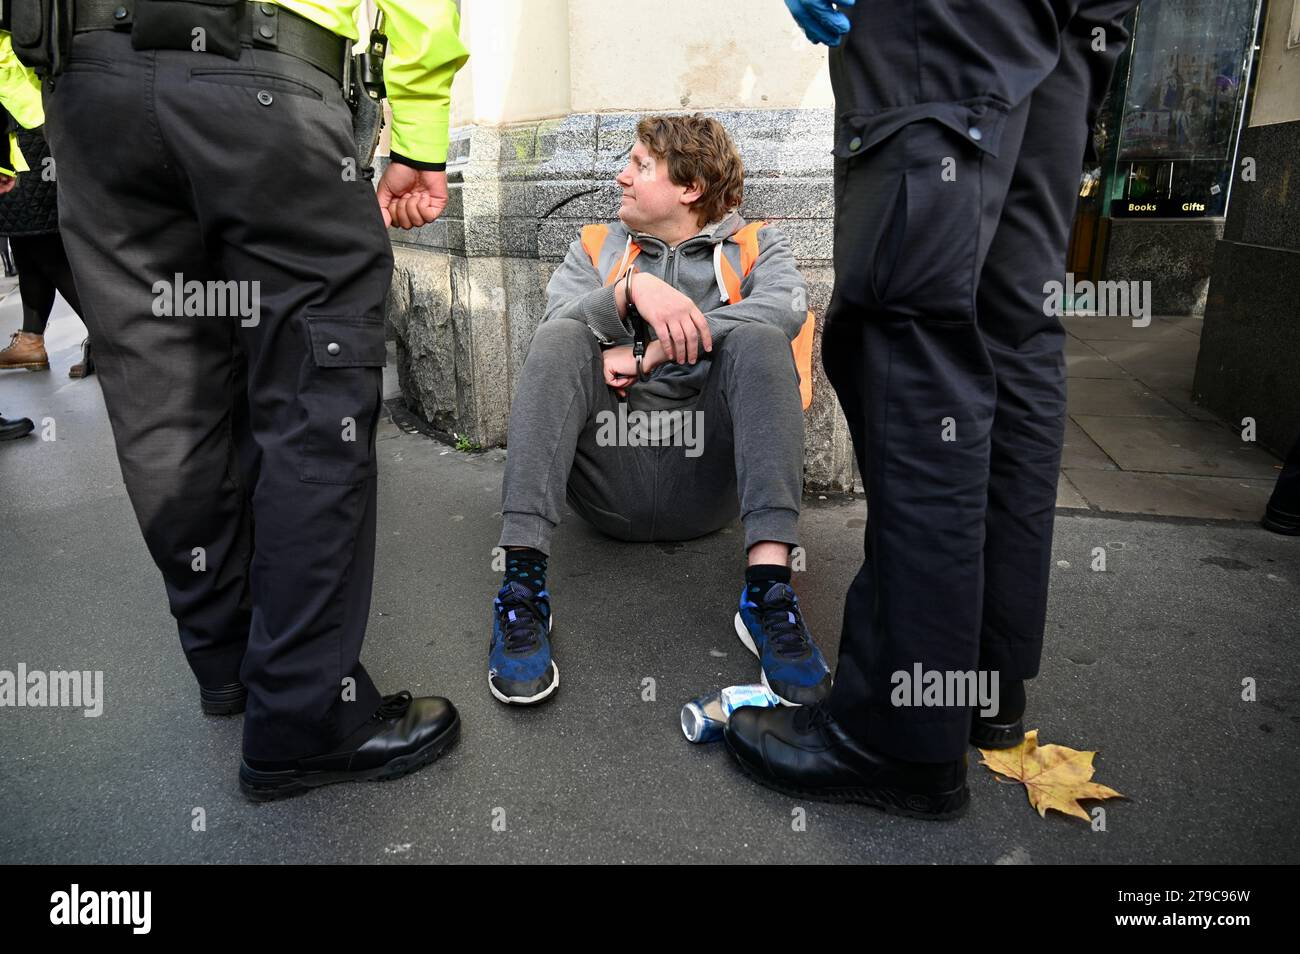 London, UK. Four people with Just Stop Oil banners were arrested in Whitehall when they moved from the pavement onto the road. Actors and academics have criticised the UK governments climate 'madness' and limits on protest. Credit: michael melia/Alamy Live News Stock Photo